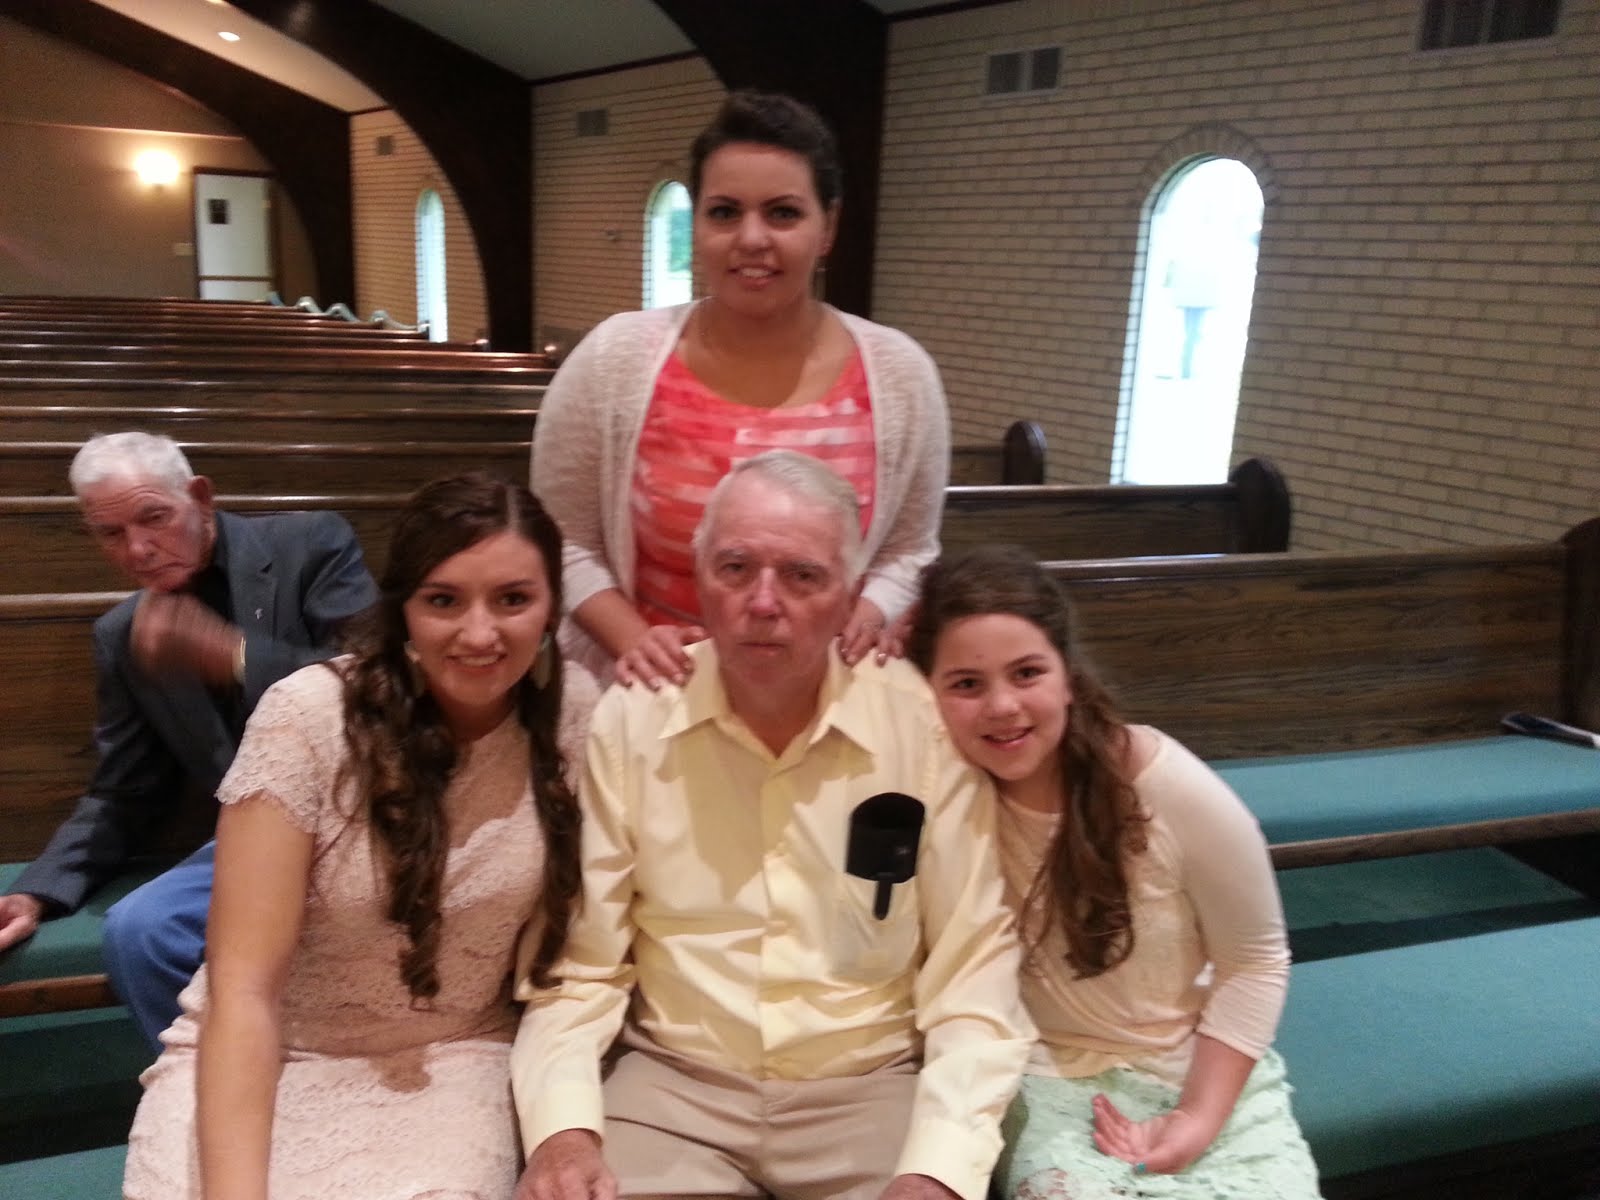 The girls and Pa